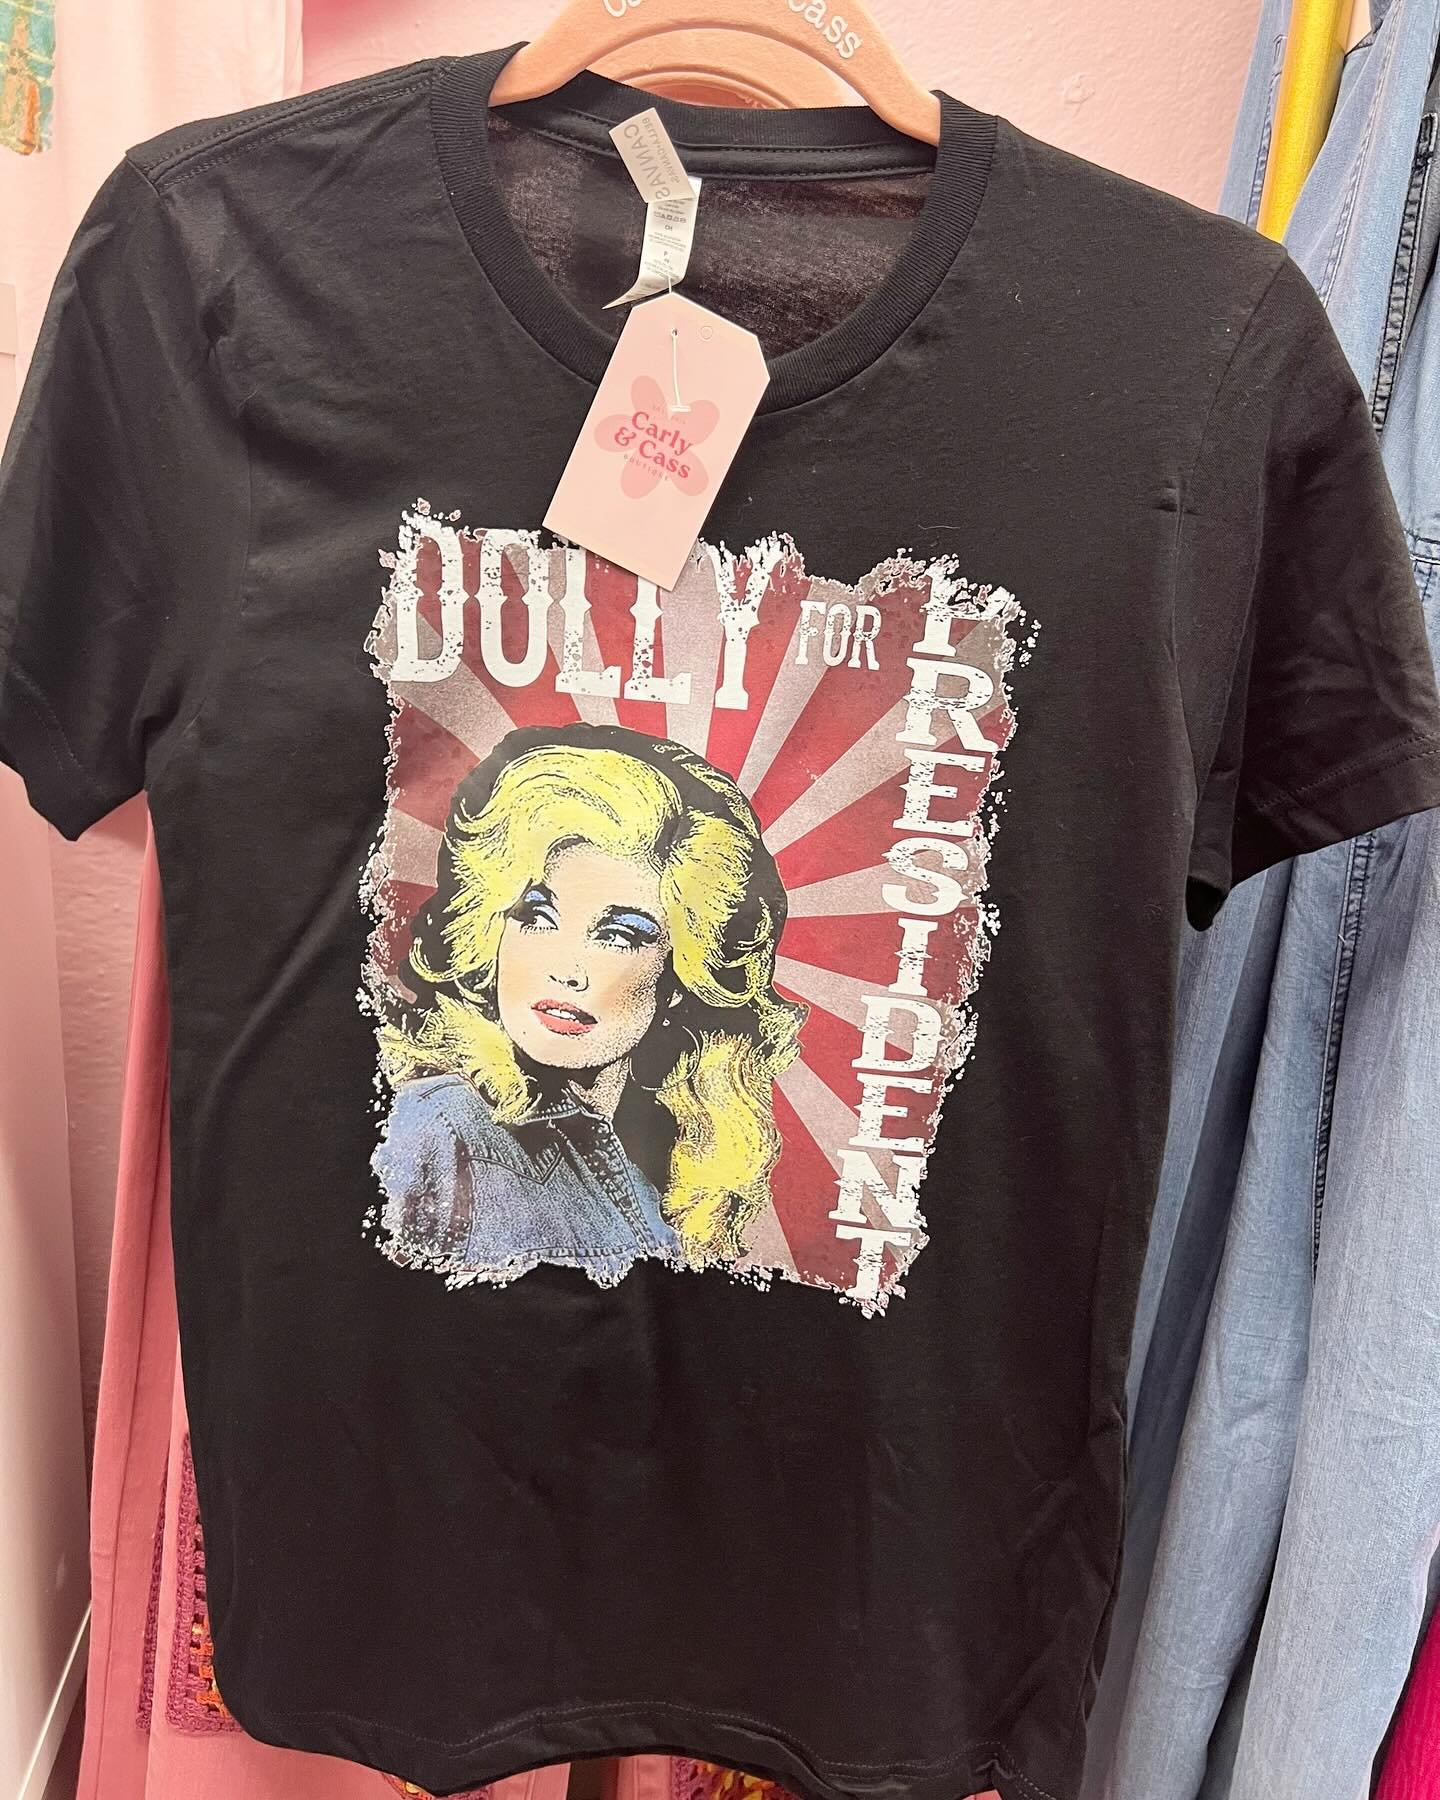 We&rsquo;d vote for her! 😍 New and restocked Dolly tees now available in our Sylva Store! #dolly 💕